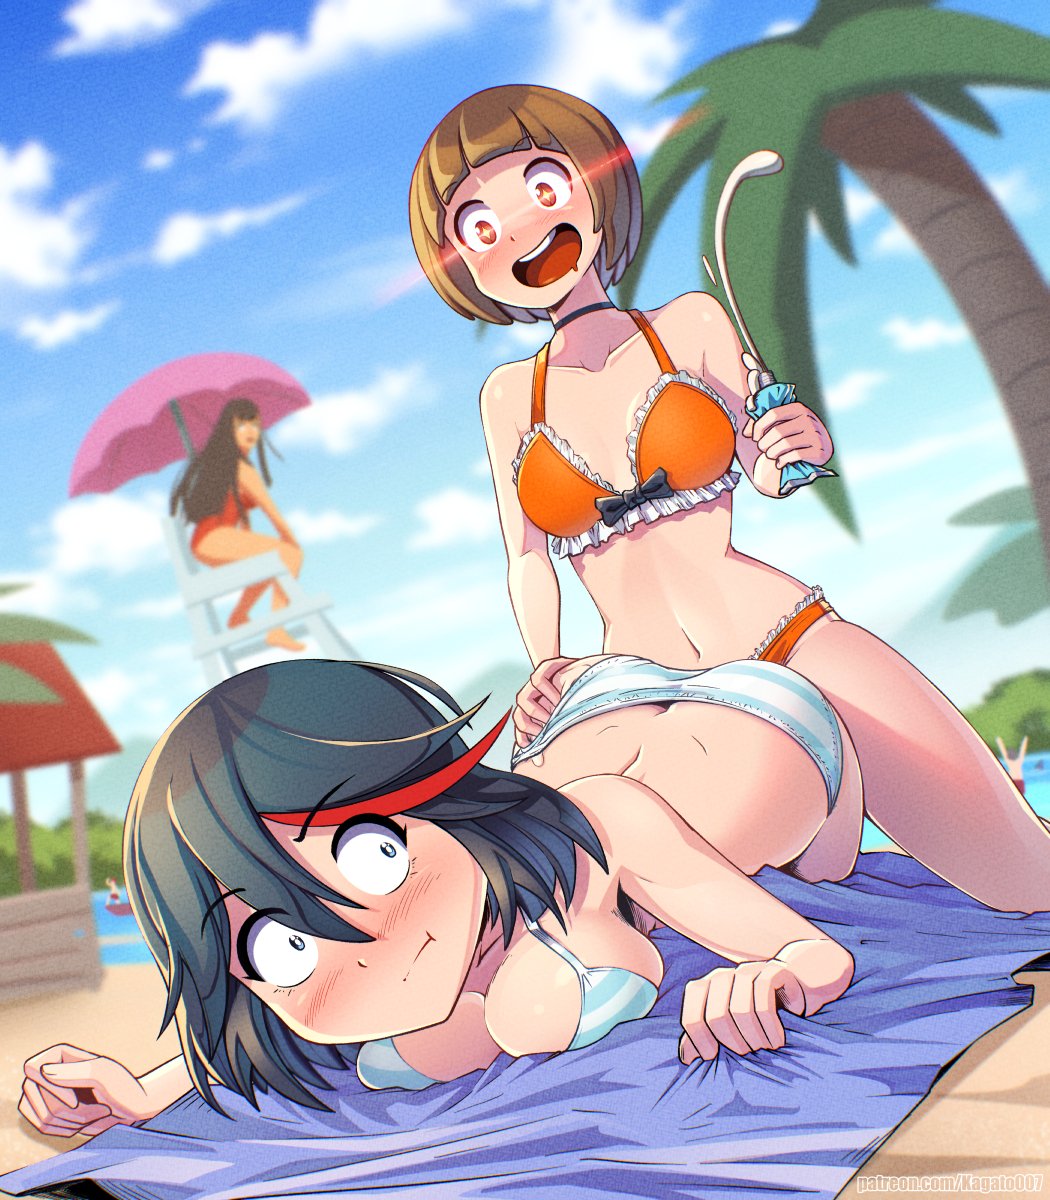 We all need that friend that's as helpful as Mako. Ryuko is so lucky